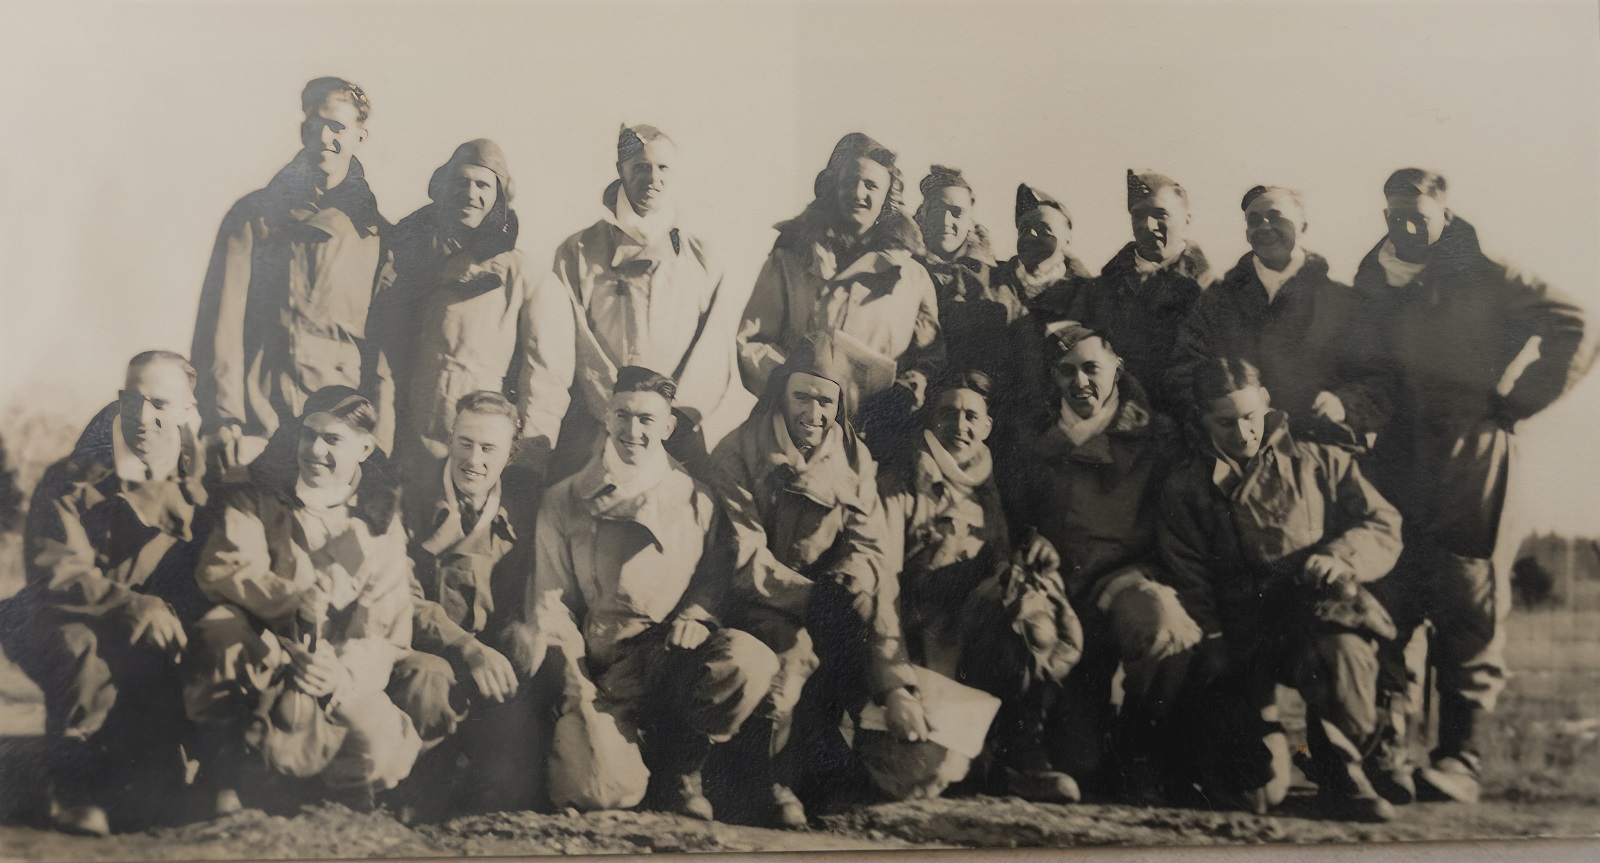 Des and his fellow air force trainees. Two of his friends were killed training to be pilots.